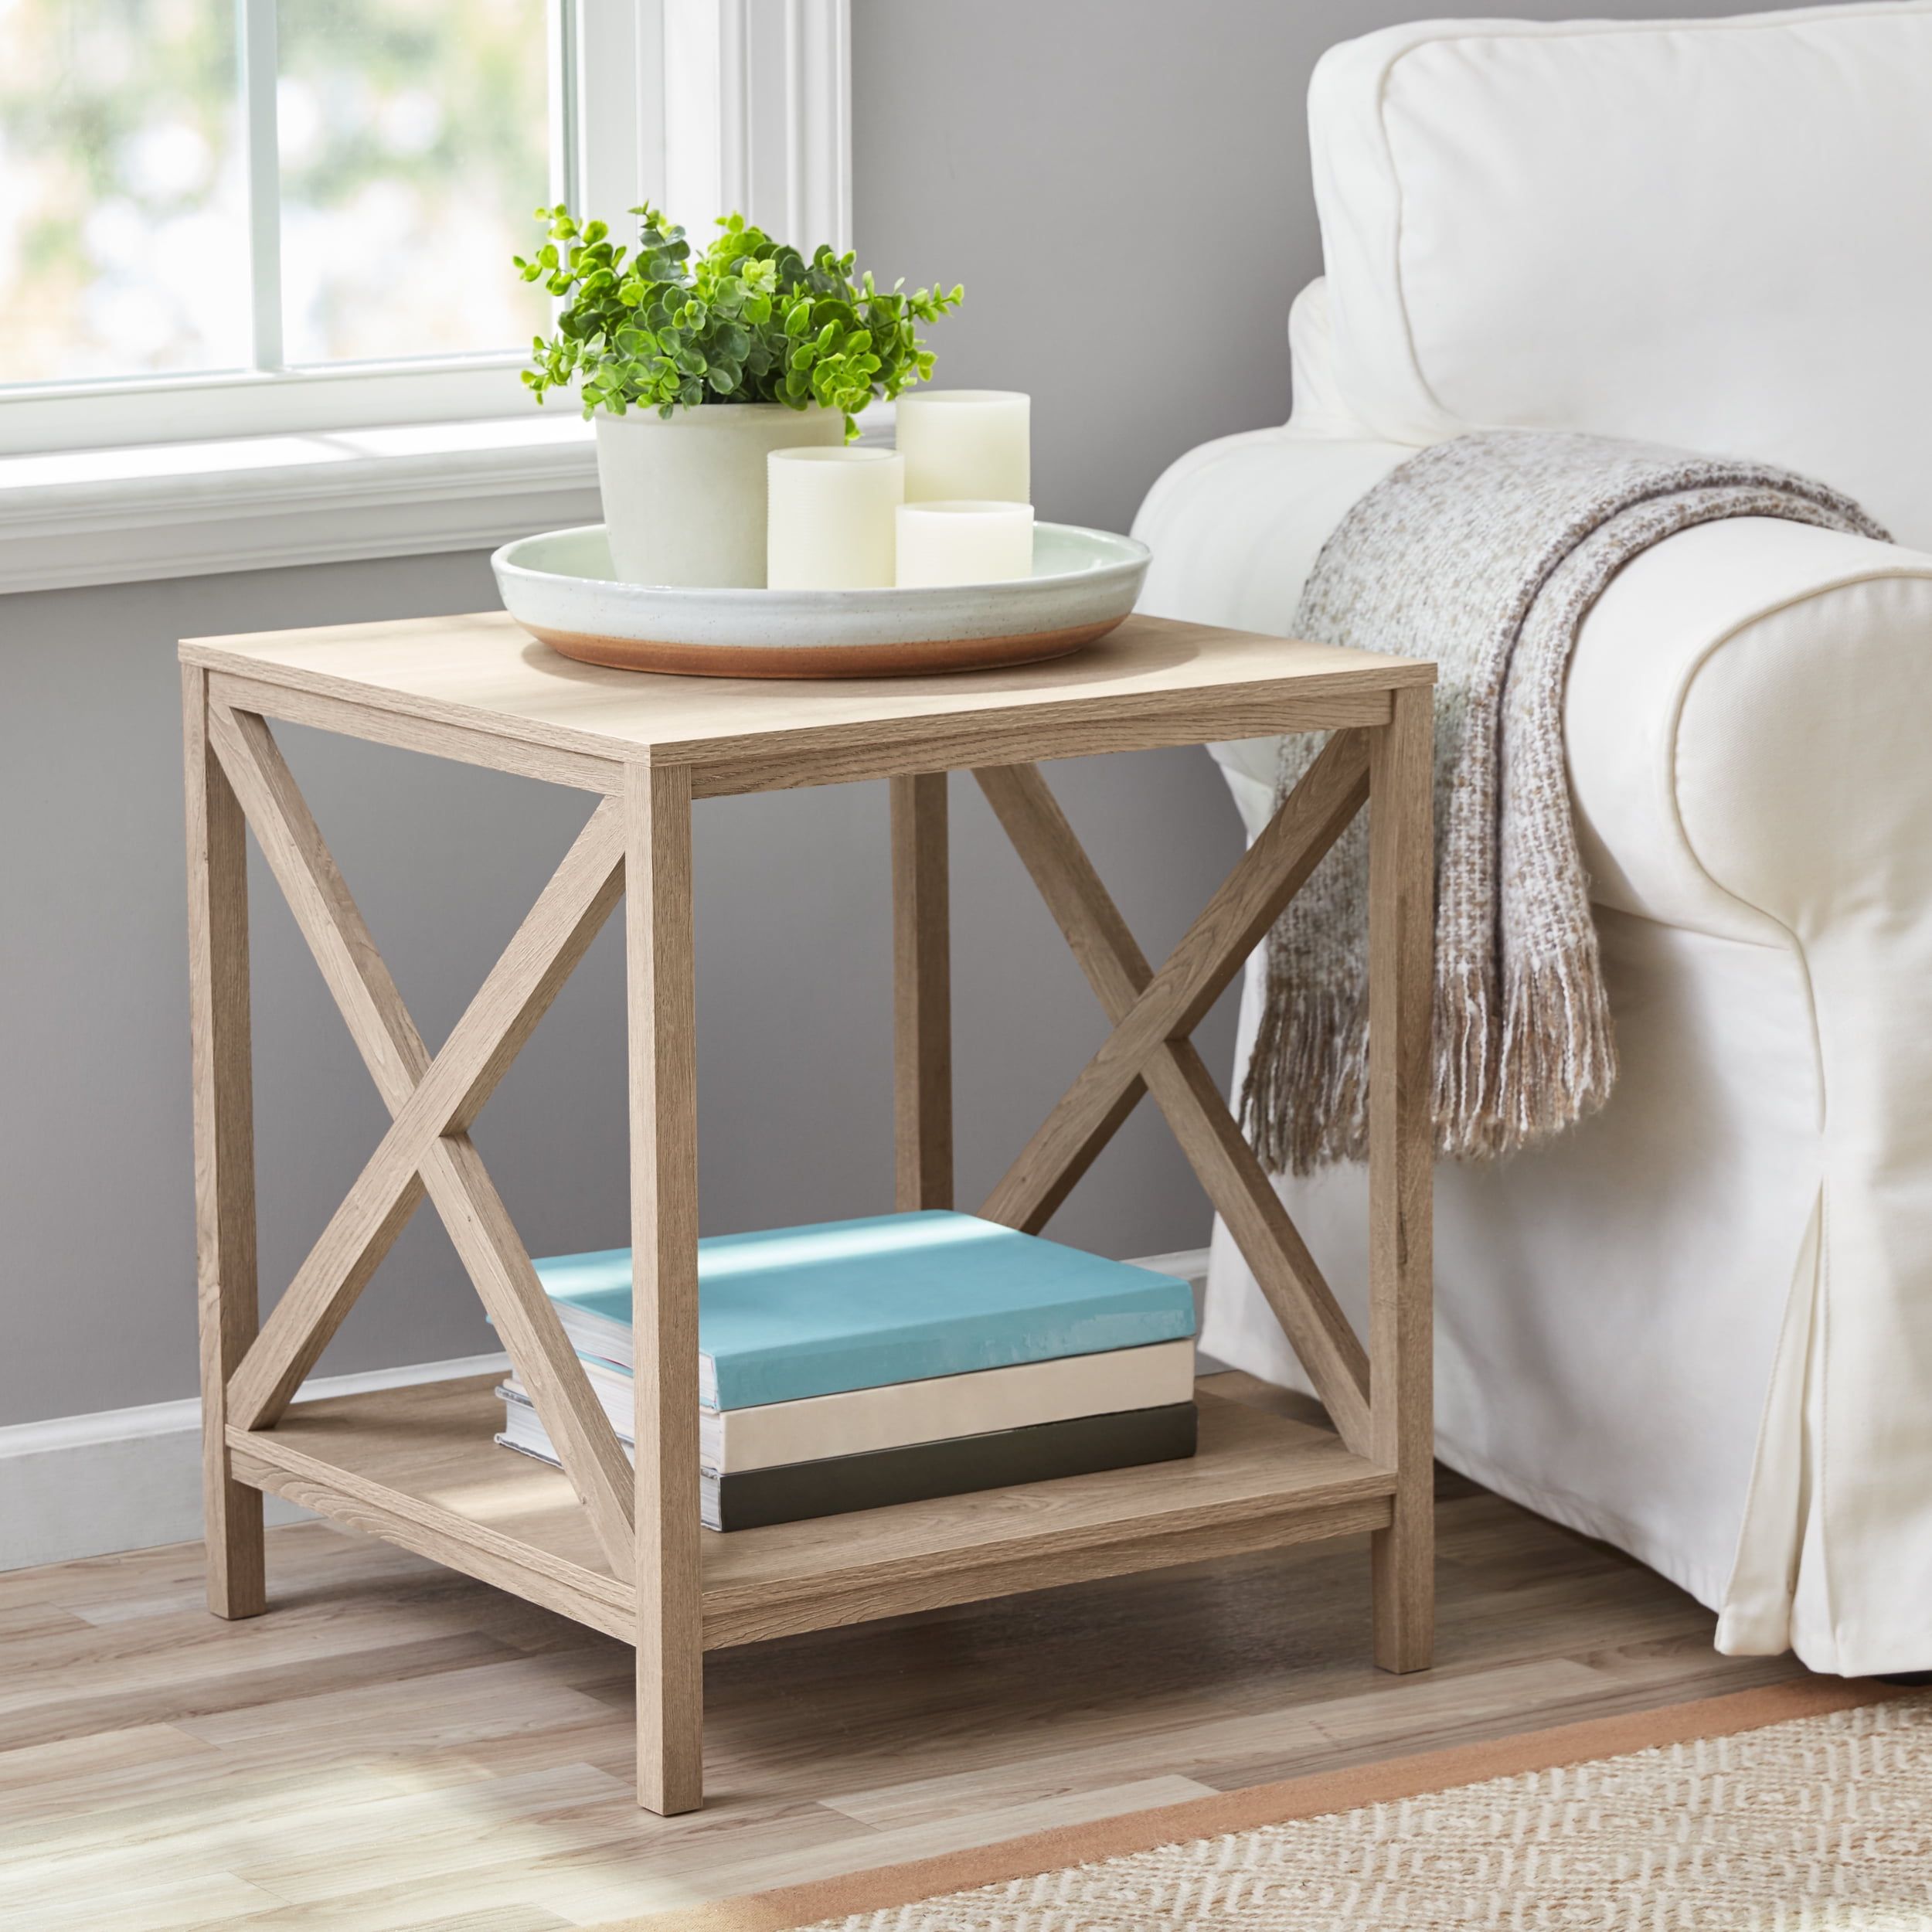 Mainstays Farmhouse Square Side Table, Rustic Gray – Walmart For Rustic Gray End Tables (View 9 of 15)